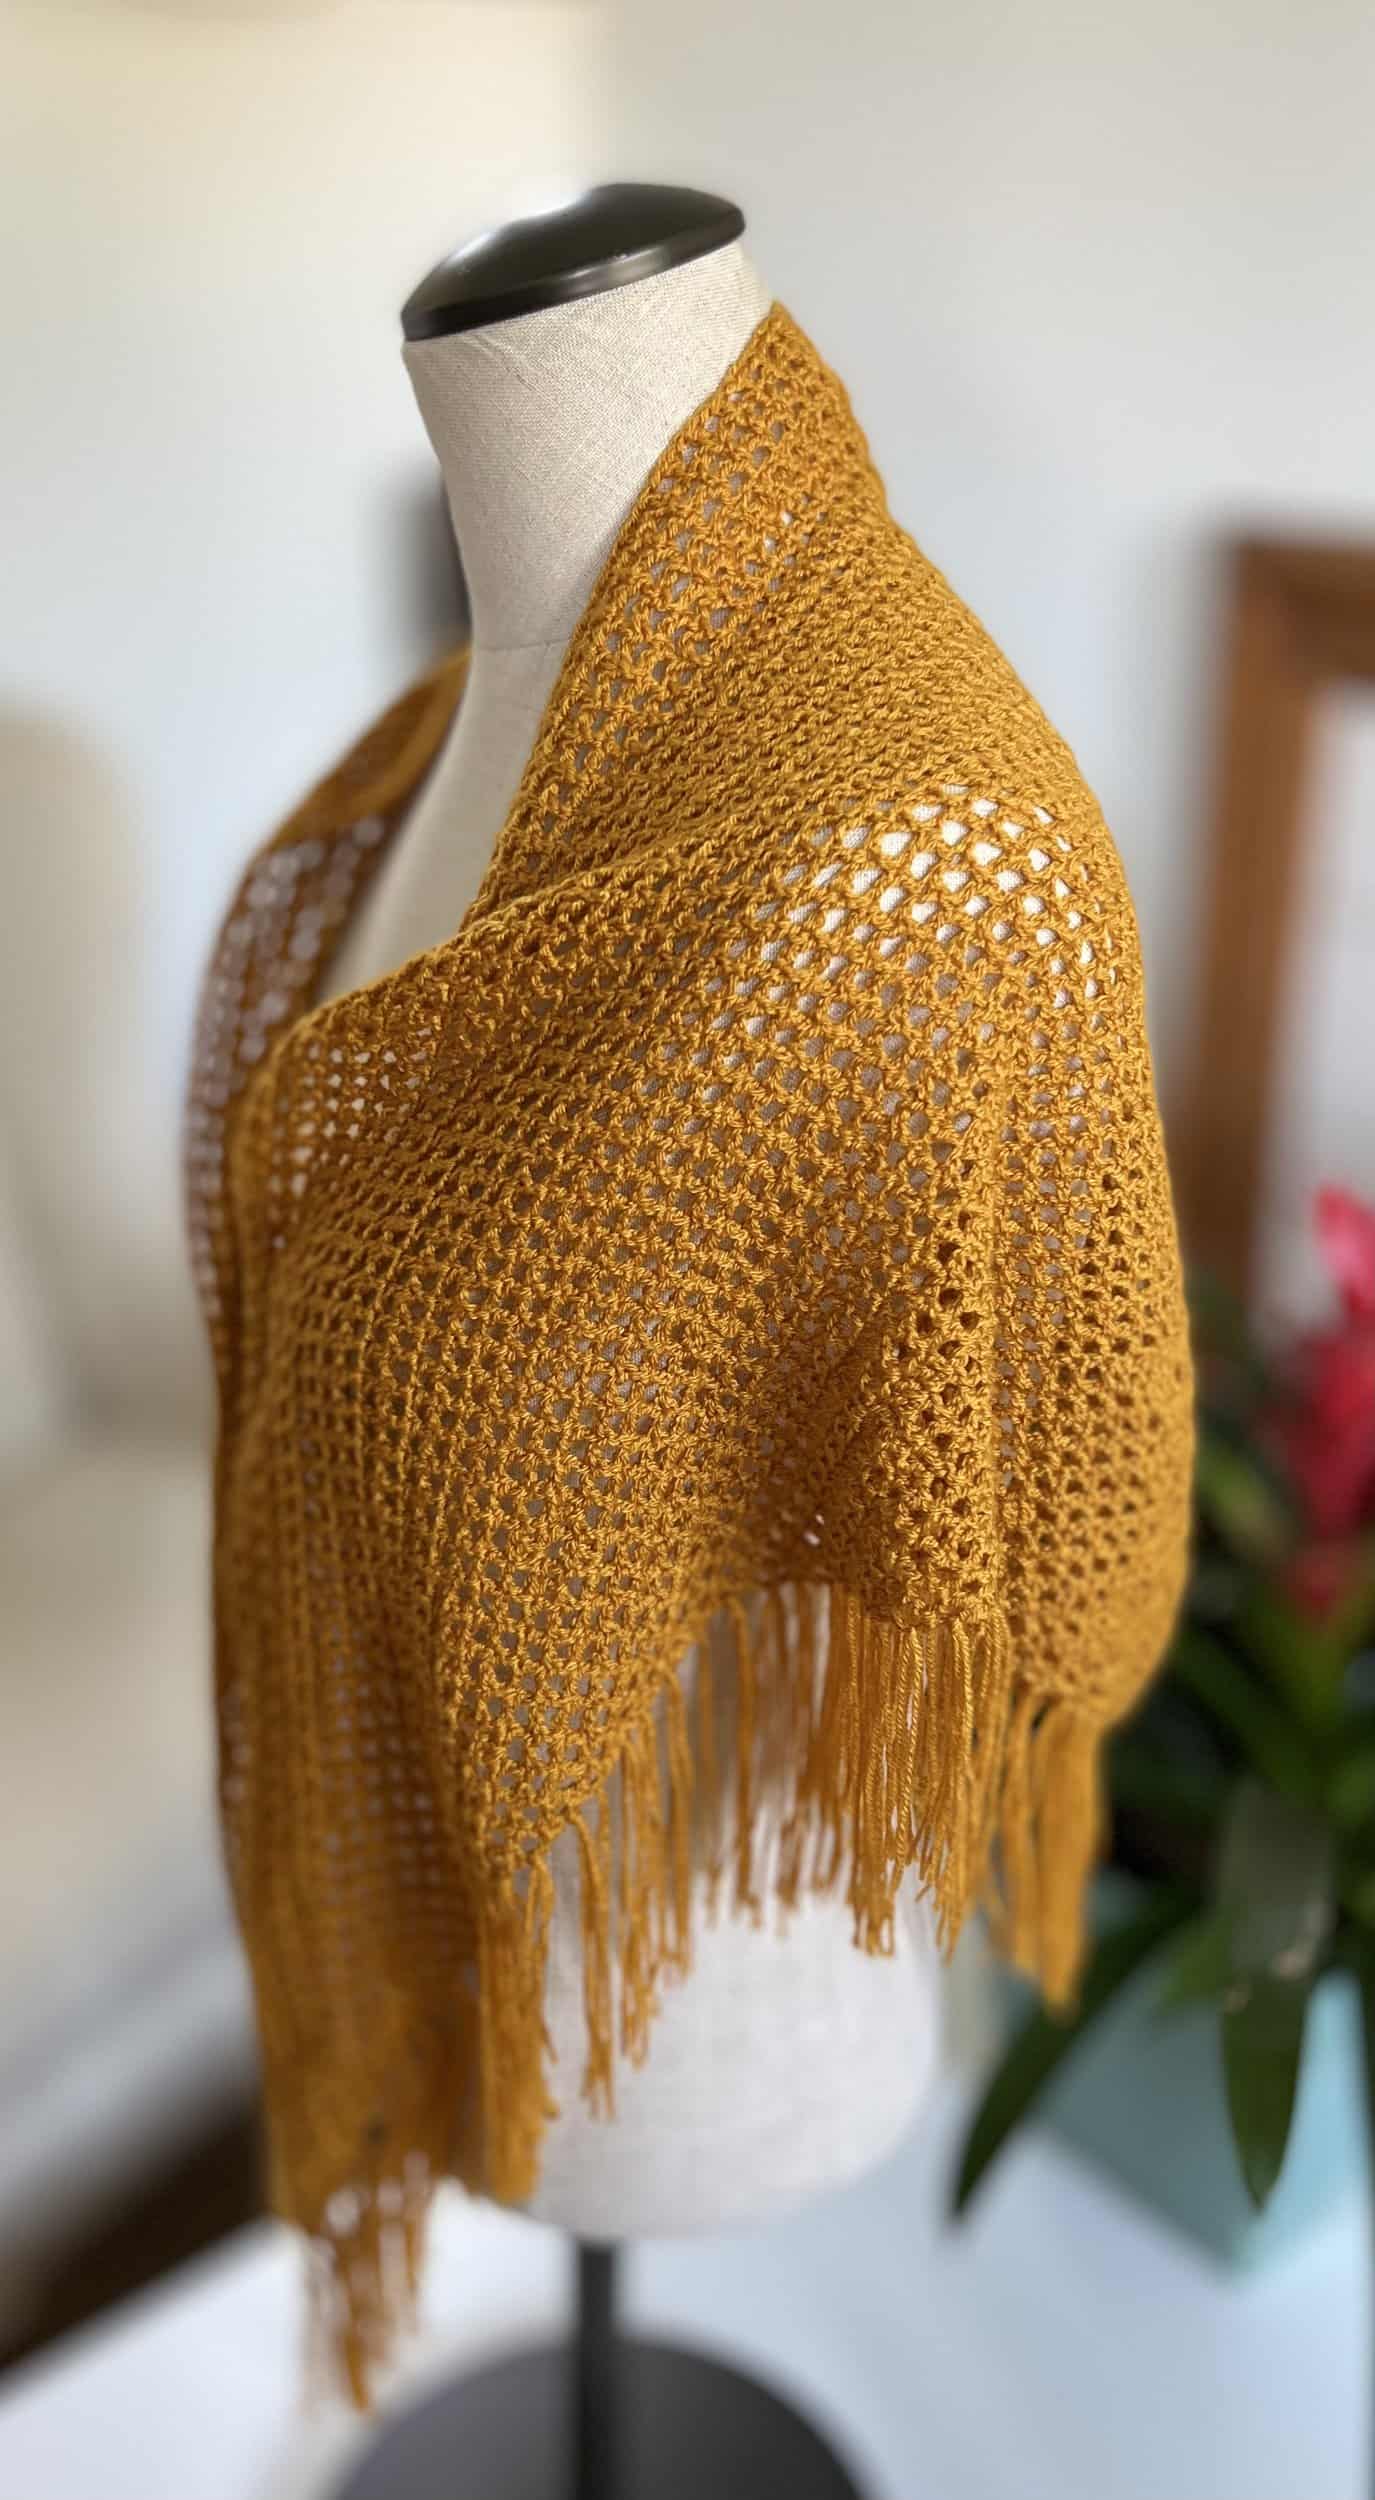 This Golden Rose Shawl is made with love by Classy Crafty Wife! Shop more unique gift ideas today with Spots Initiatives, the best way to support creators.